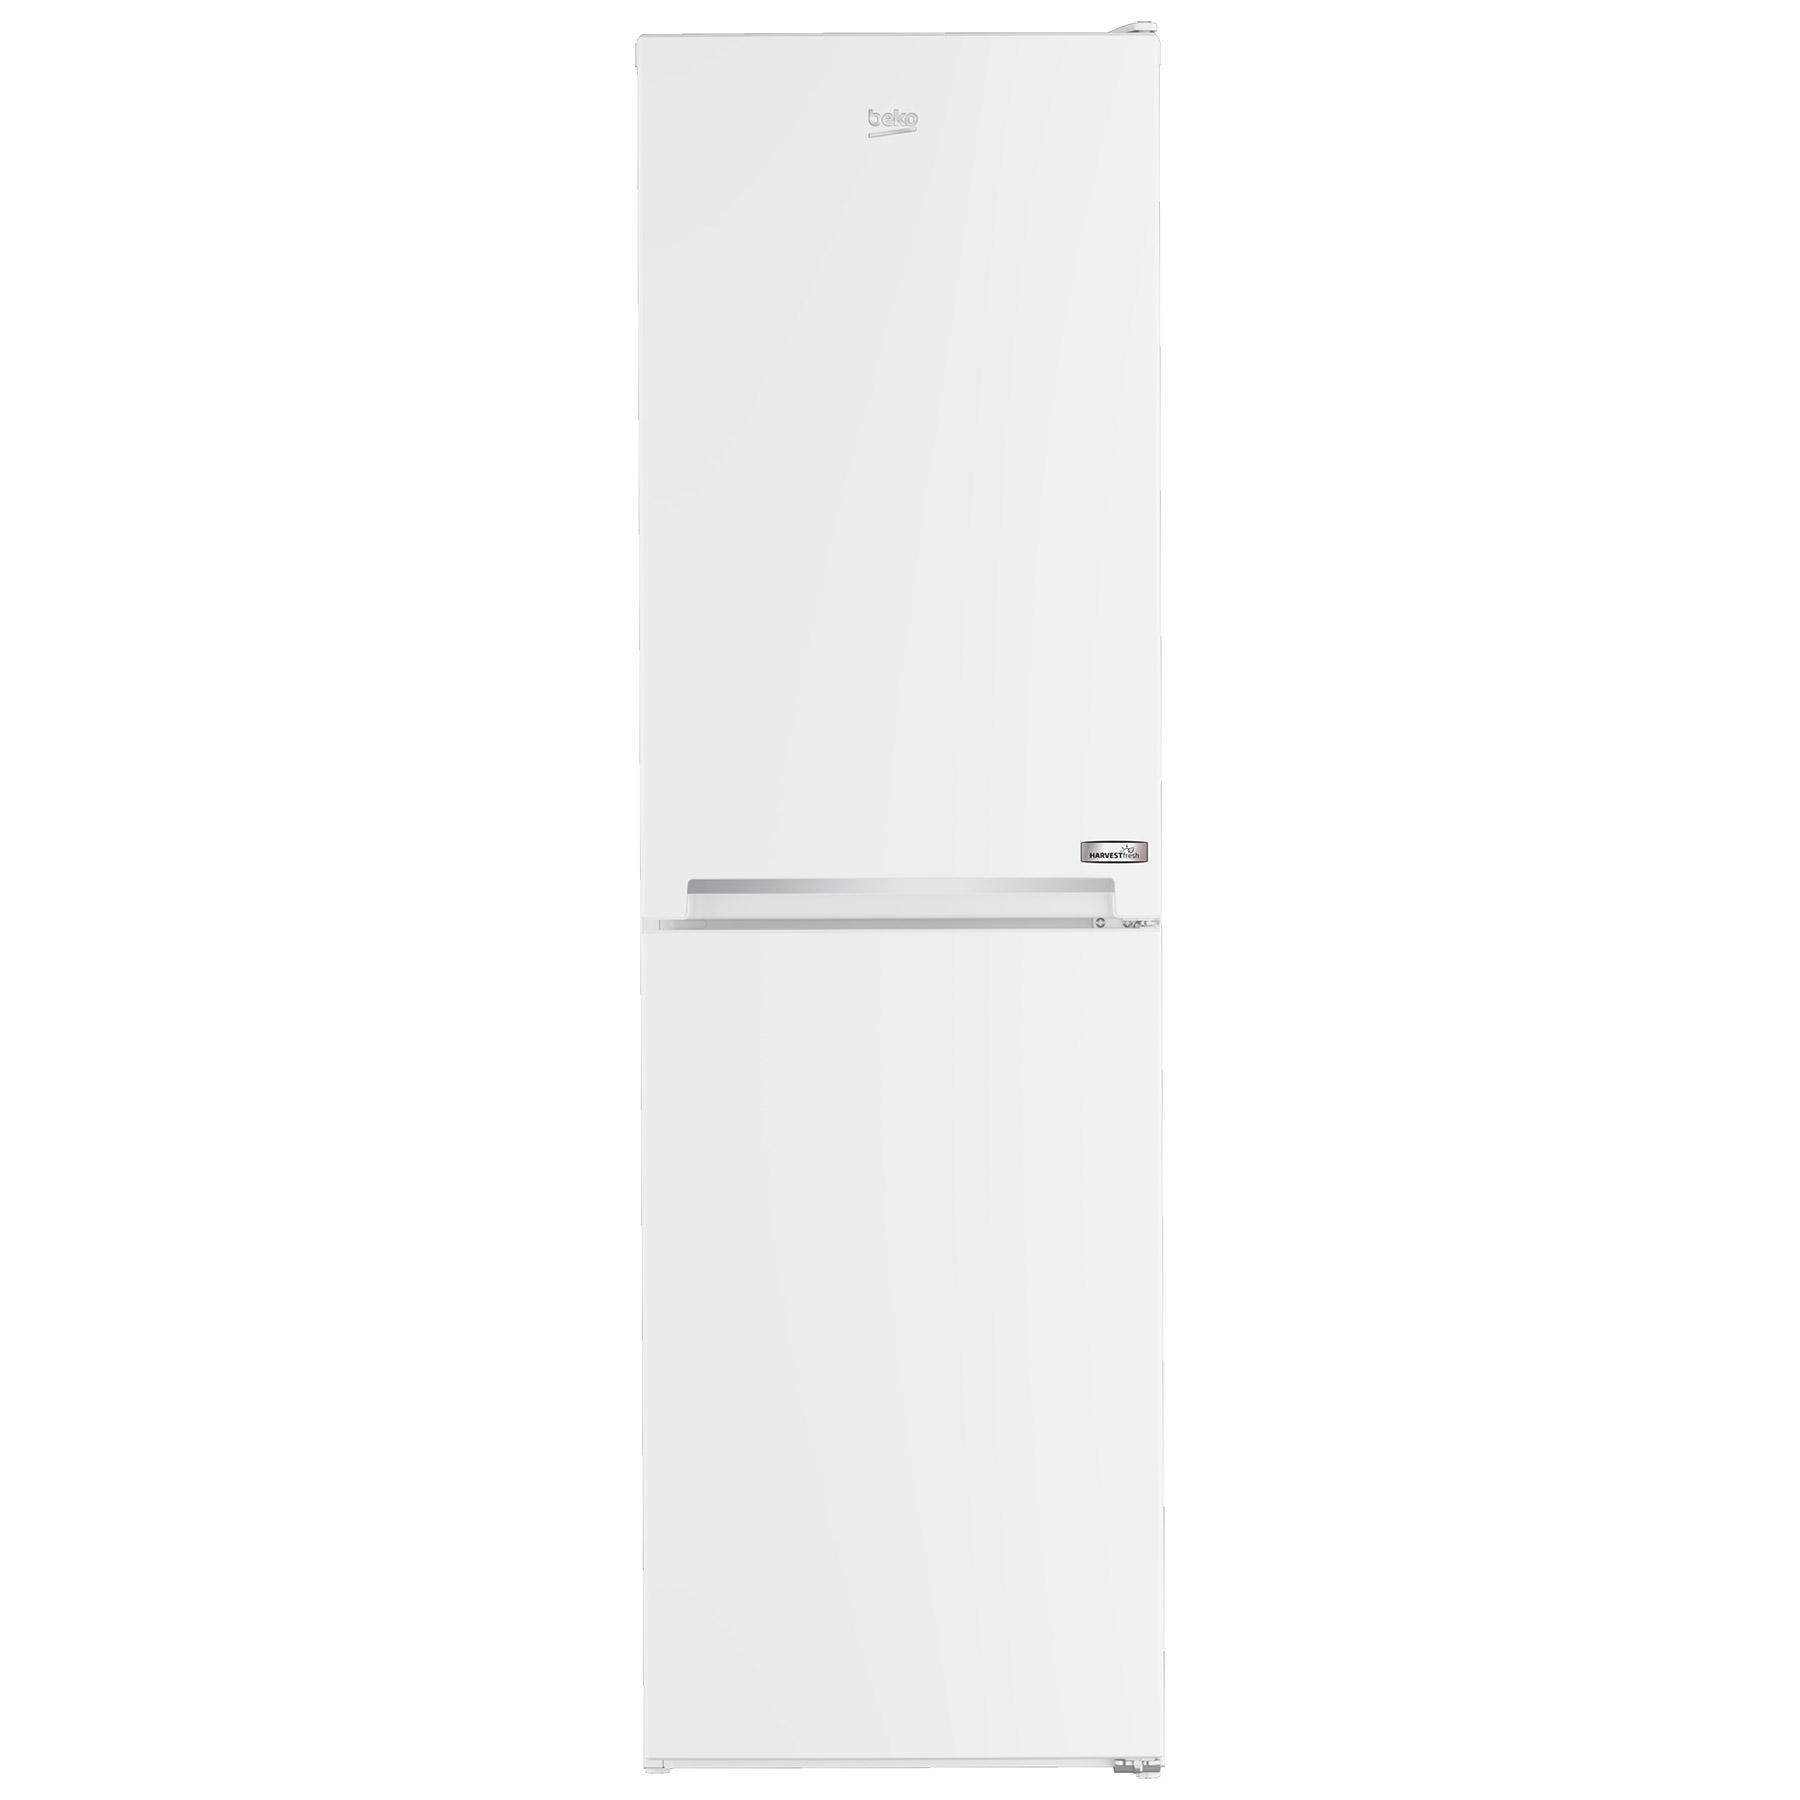 Beko CNG3582VW 55cm Frost Free Fridge Freezer in White 1 82m F Rated